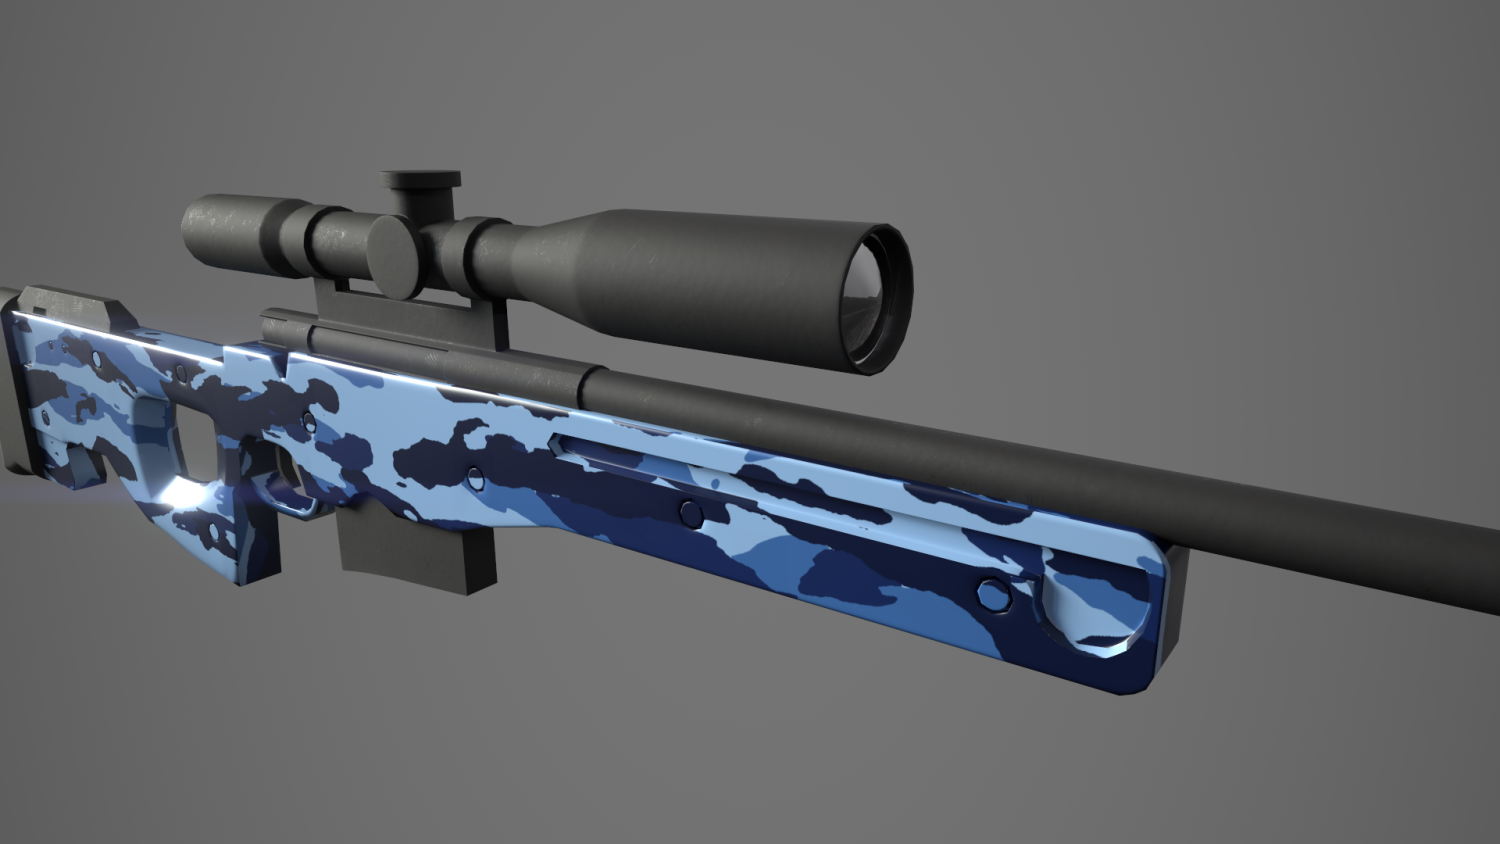 Awp cannons kg v4 мастерская фото 102